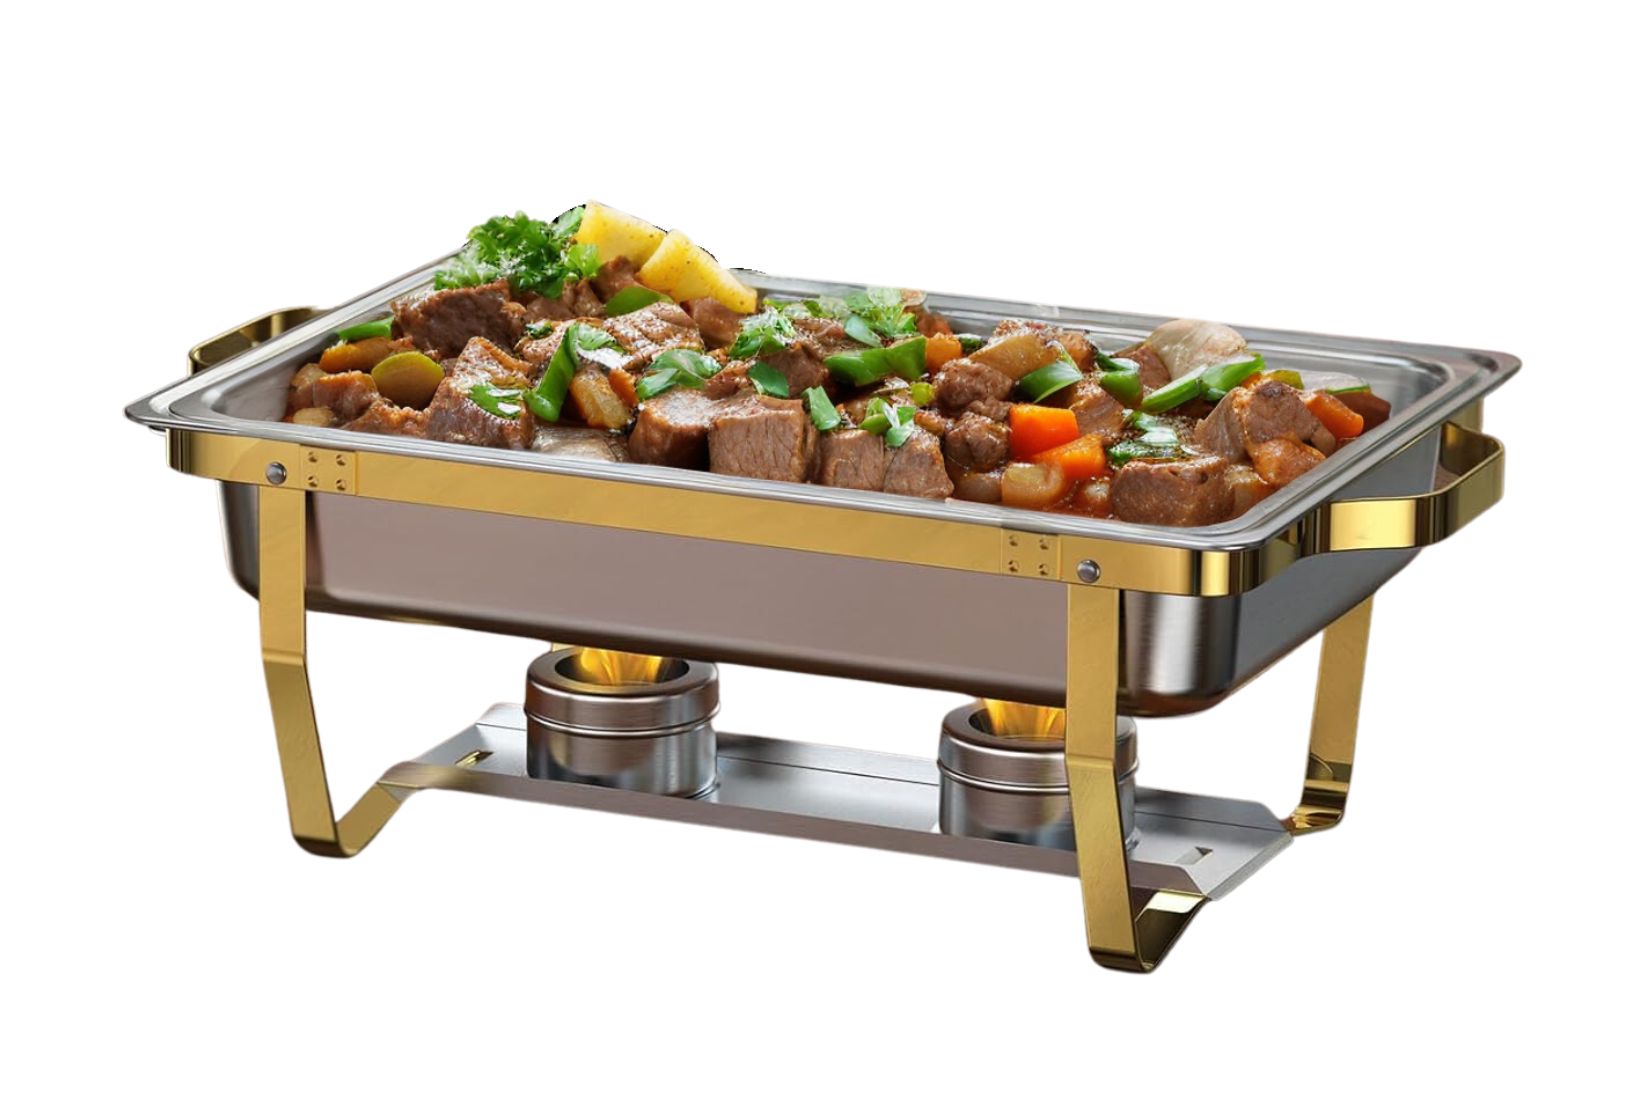 Sterno chafing dish rental in silver gold color